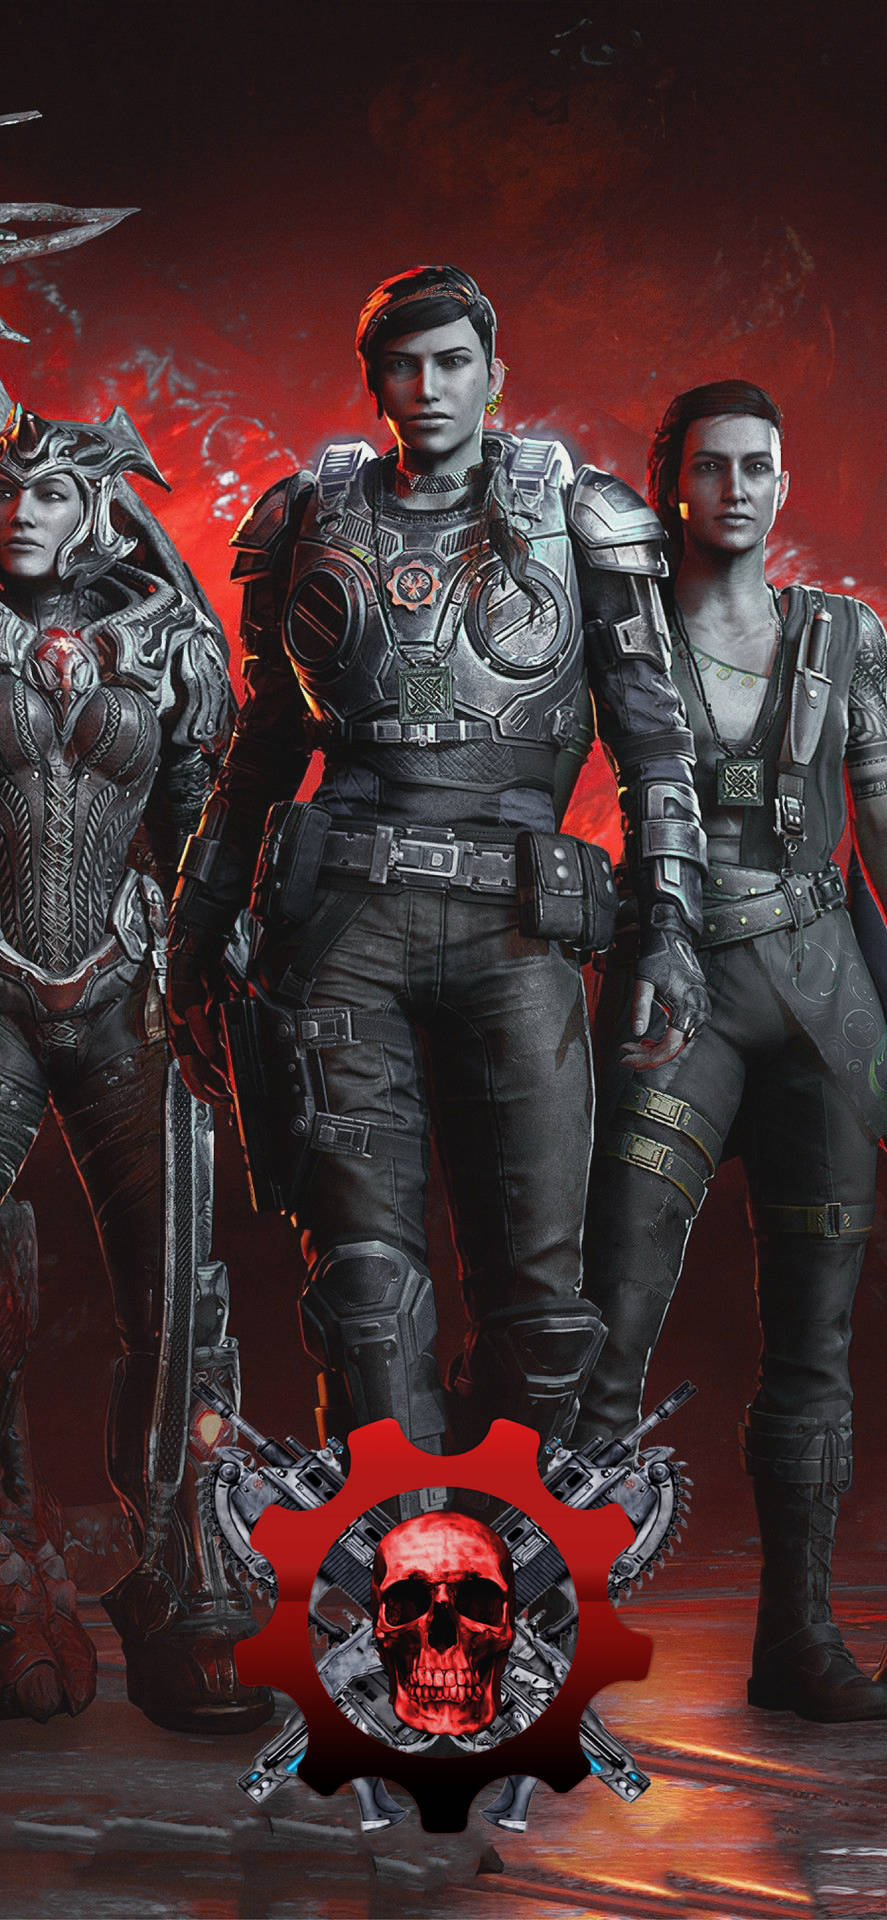 Kait With Female Warriors Gears 5 Iphone Wallpaper